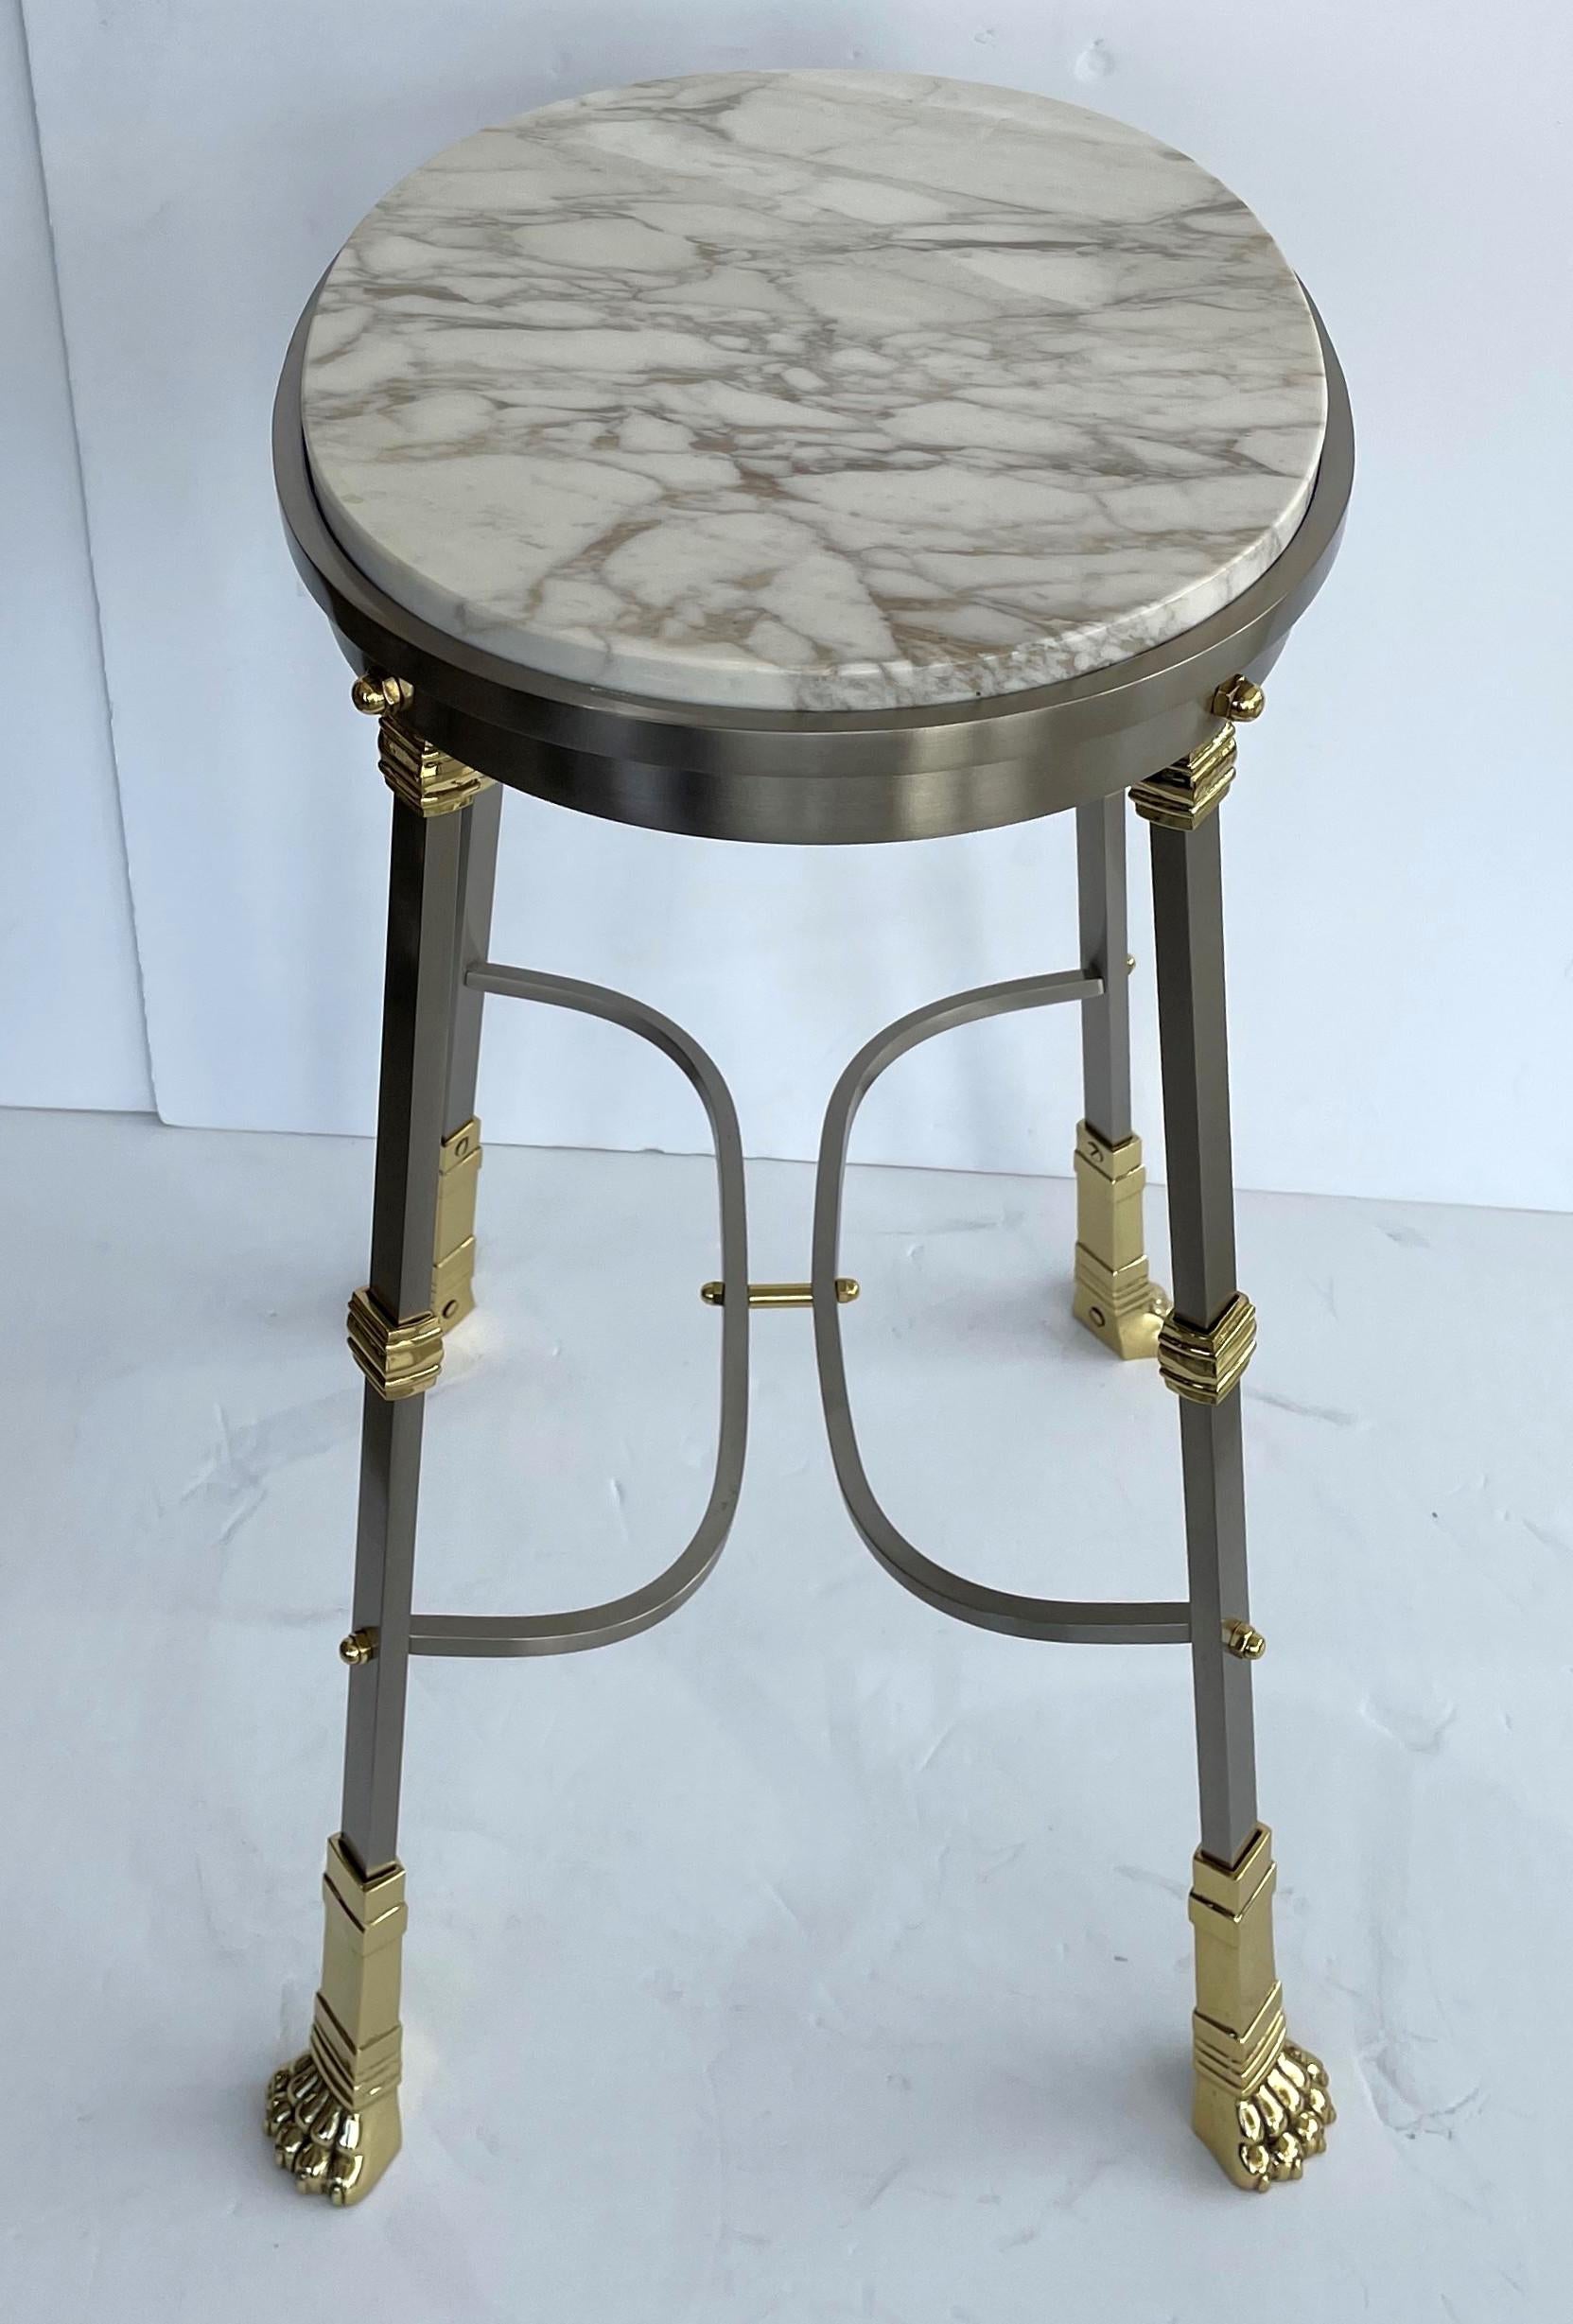 Maison Jansen Empire Revival Side Table In Good Condition For Sale In West Palm Beach, FL